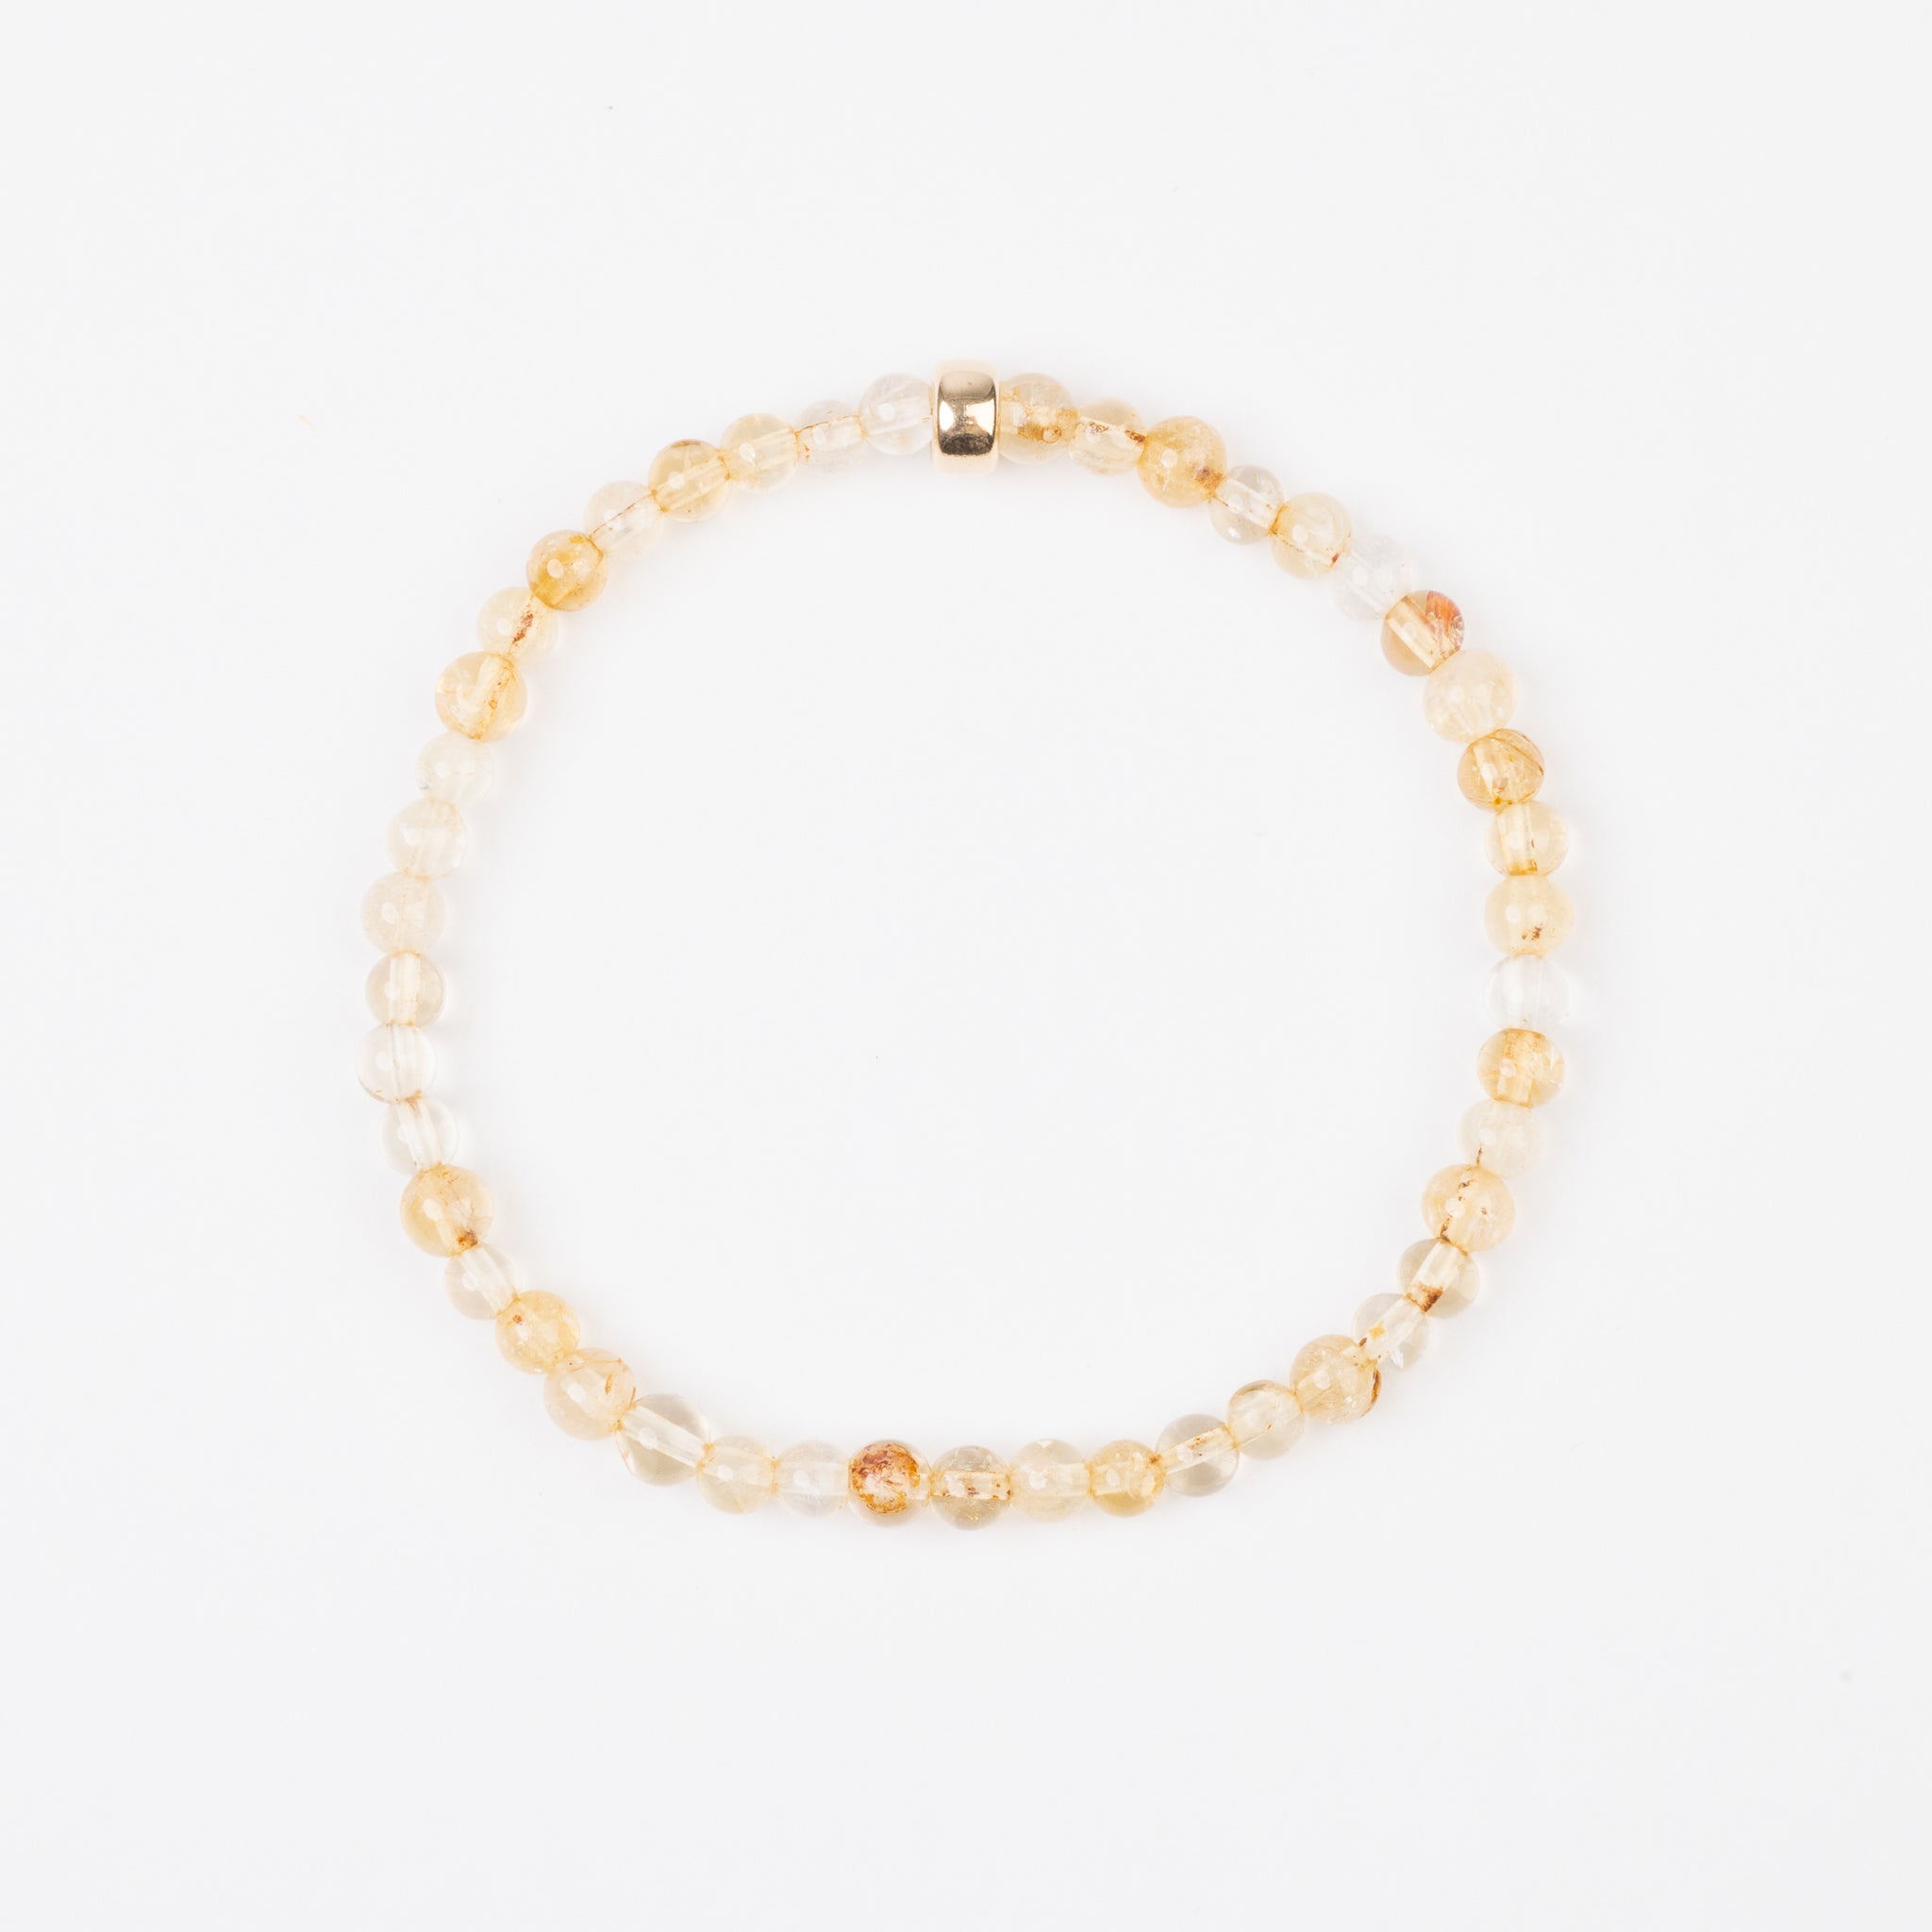 The Sun Ray - Citrine and Silver Bracelet